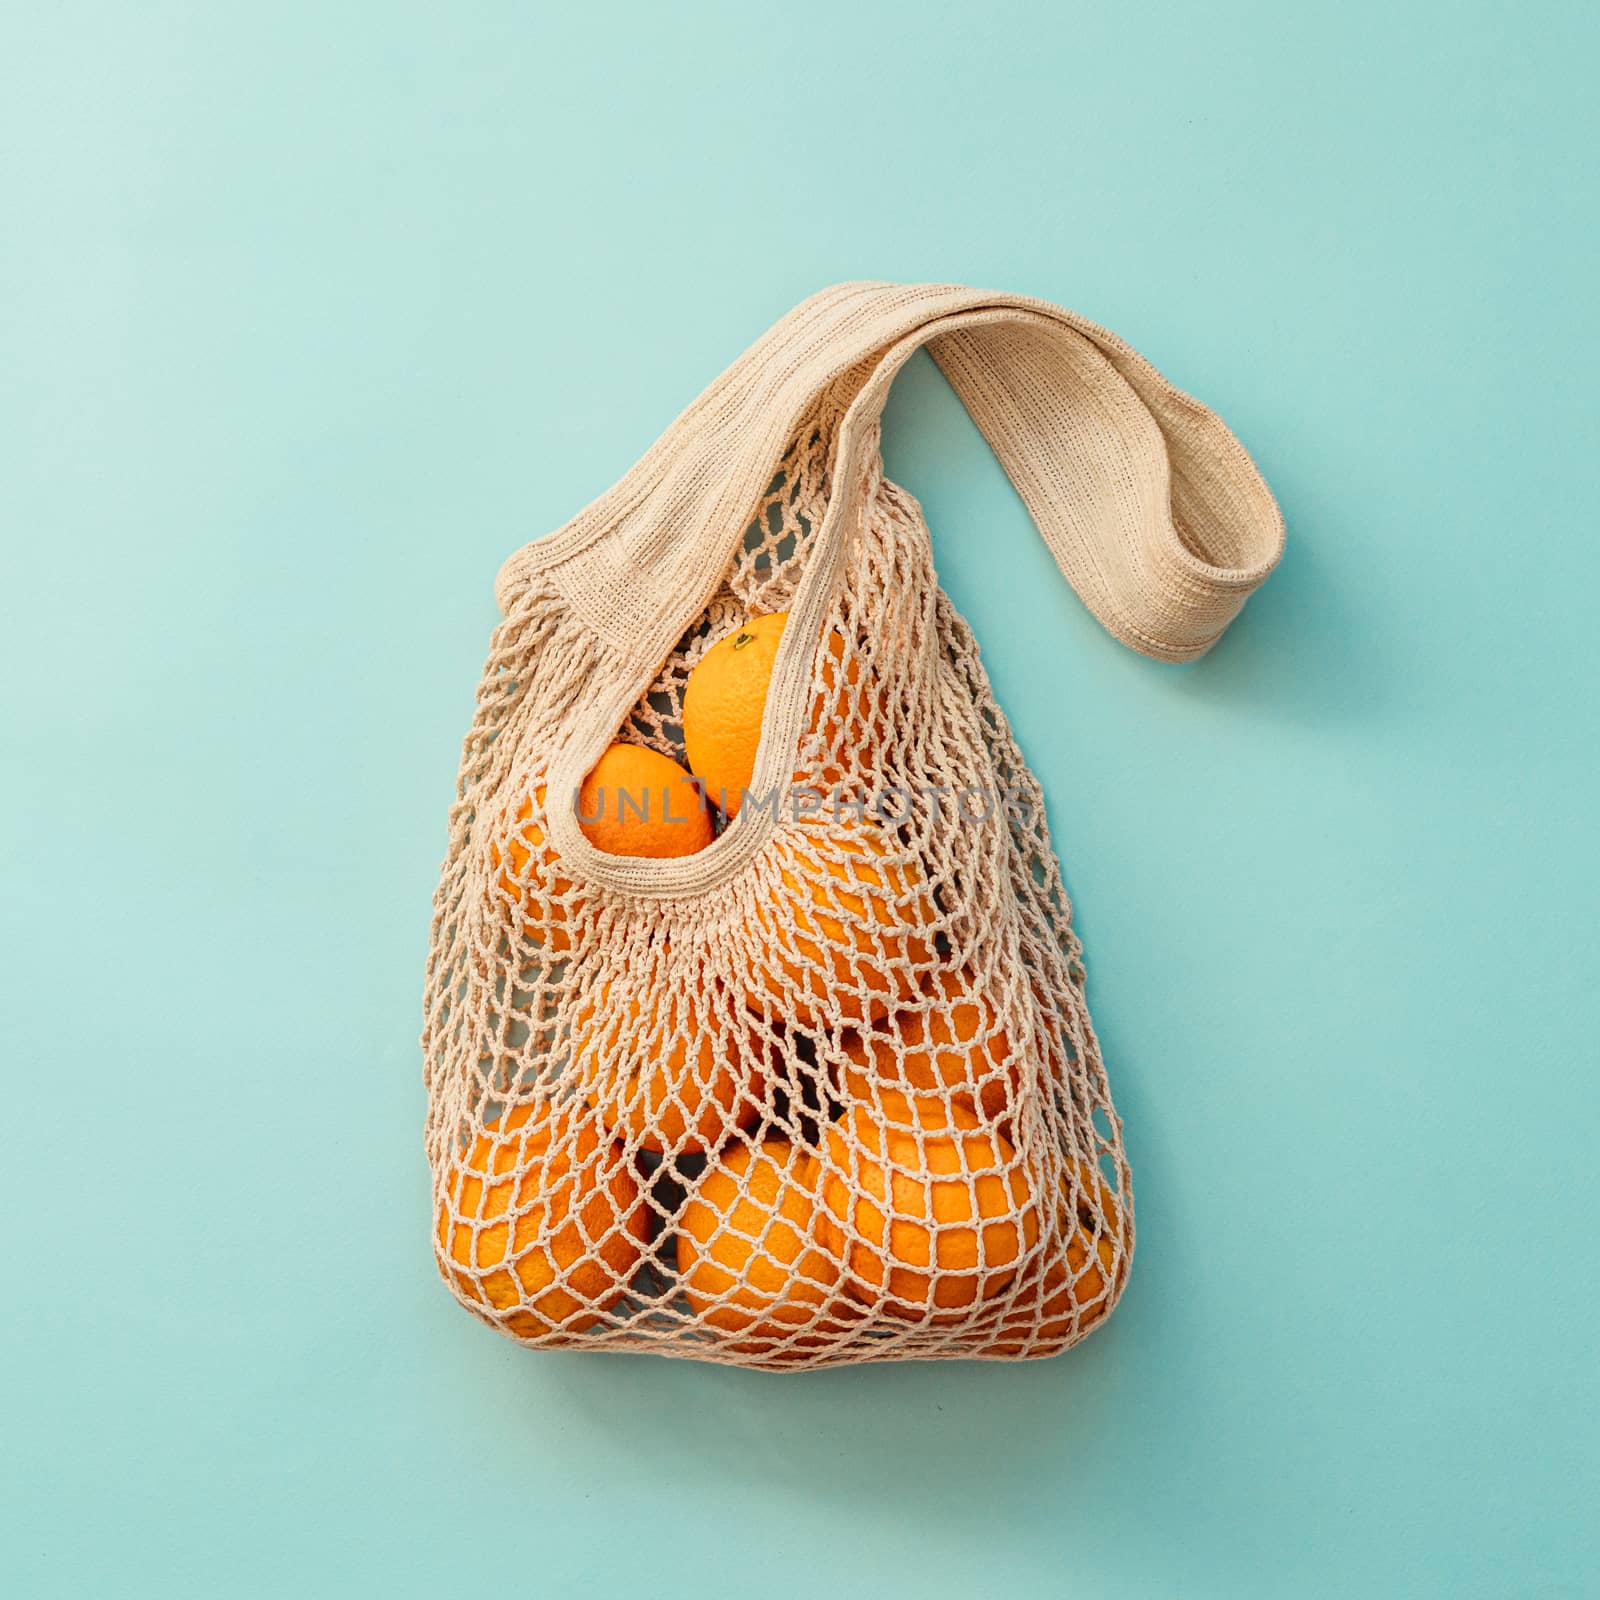 Mesh bag with fruits on blue background.Zero waste by fascinadora